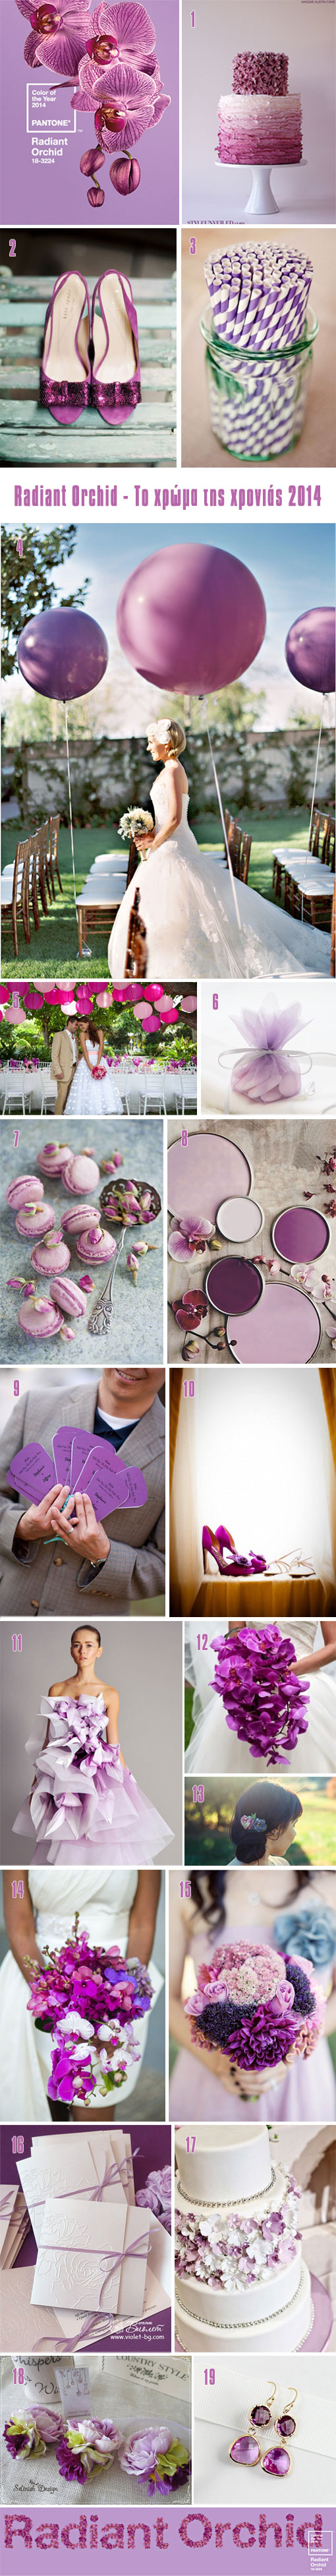 radiant orchid wedding color inspiration